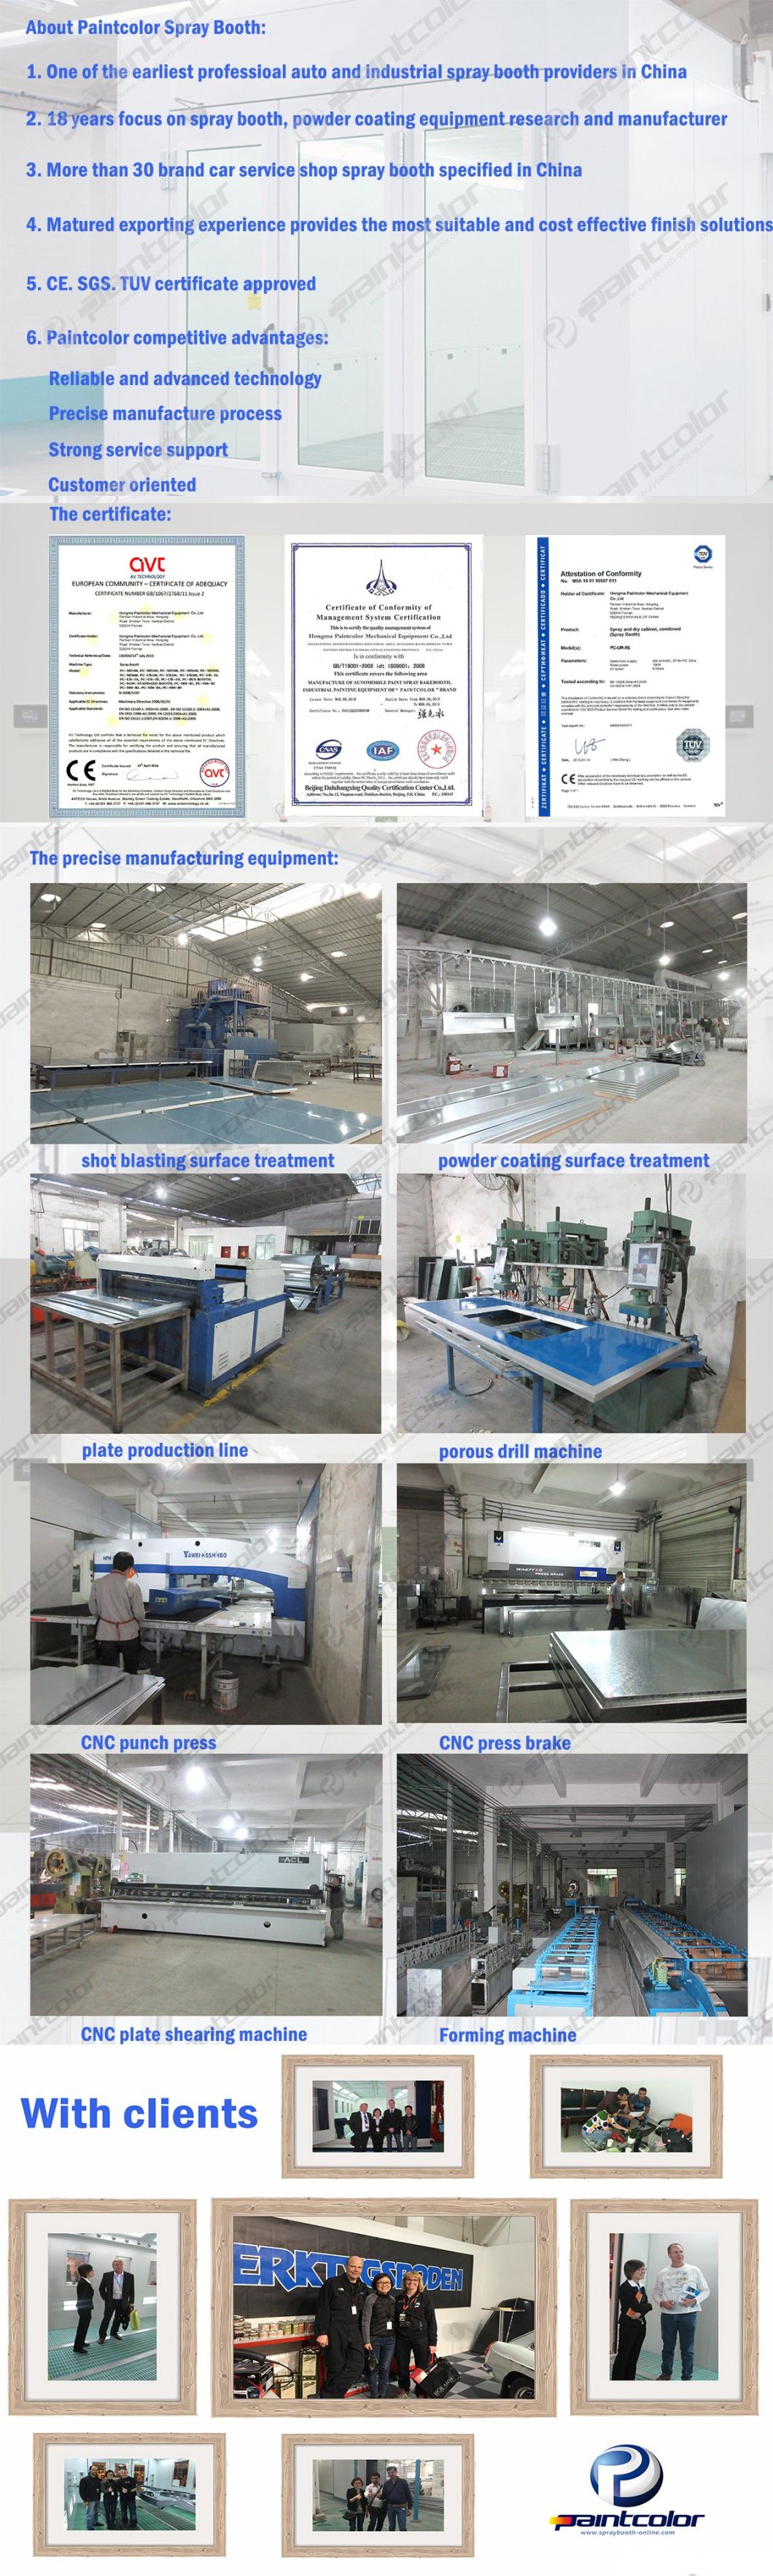 Automotive Sheet-Metal Curing System Consisting Paint Booth, Drying Oven and Prep Station a Whole Process of Painting Line